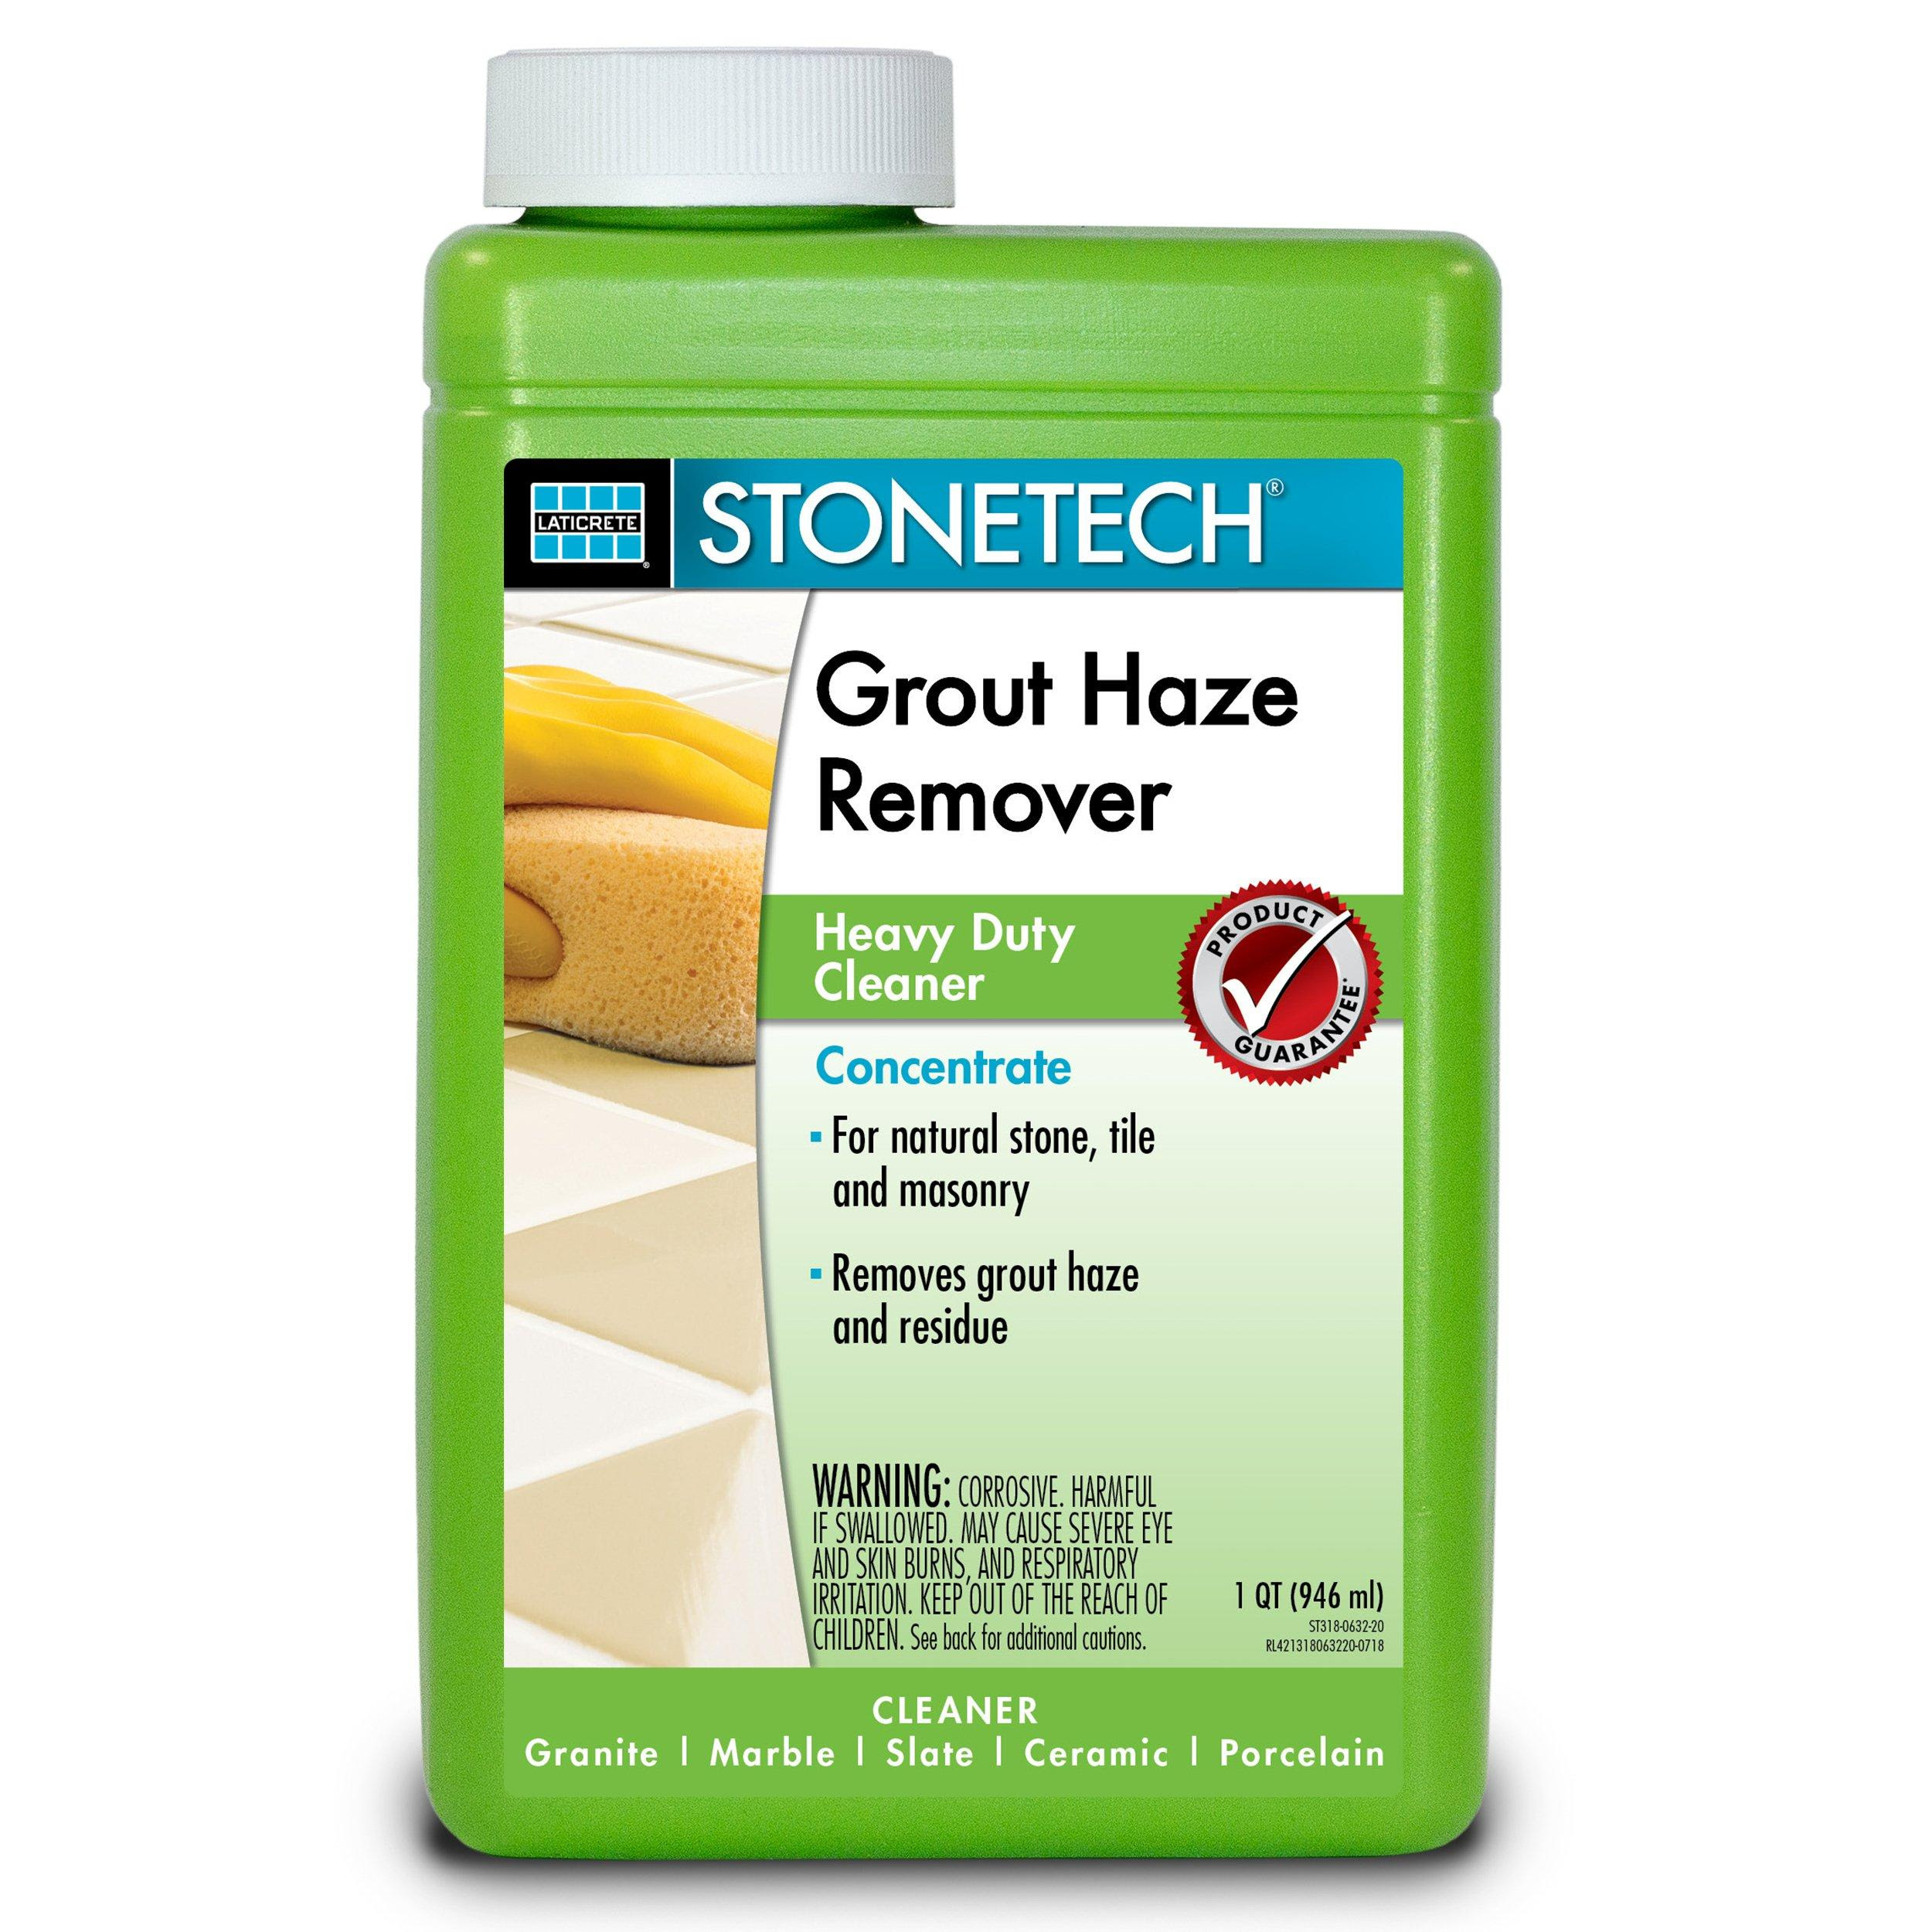 Floor And Decor Grout Haze Remover, Tilelab Grout Haze Remover